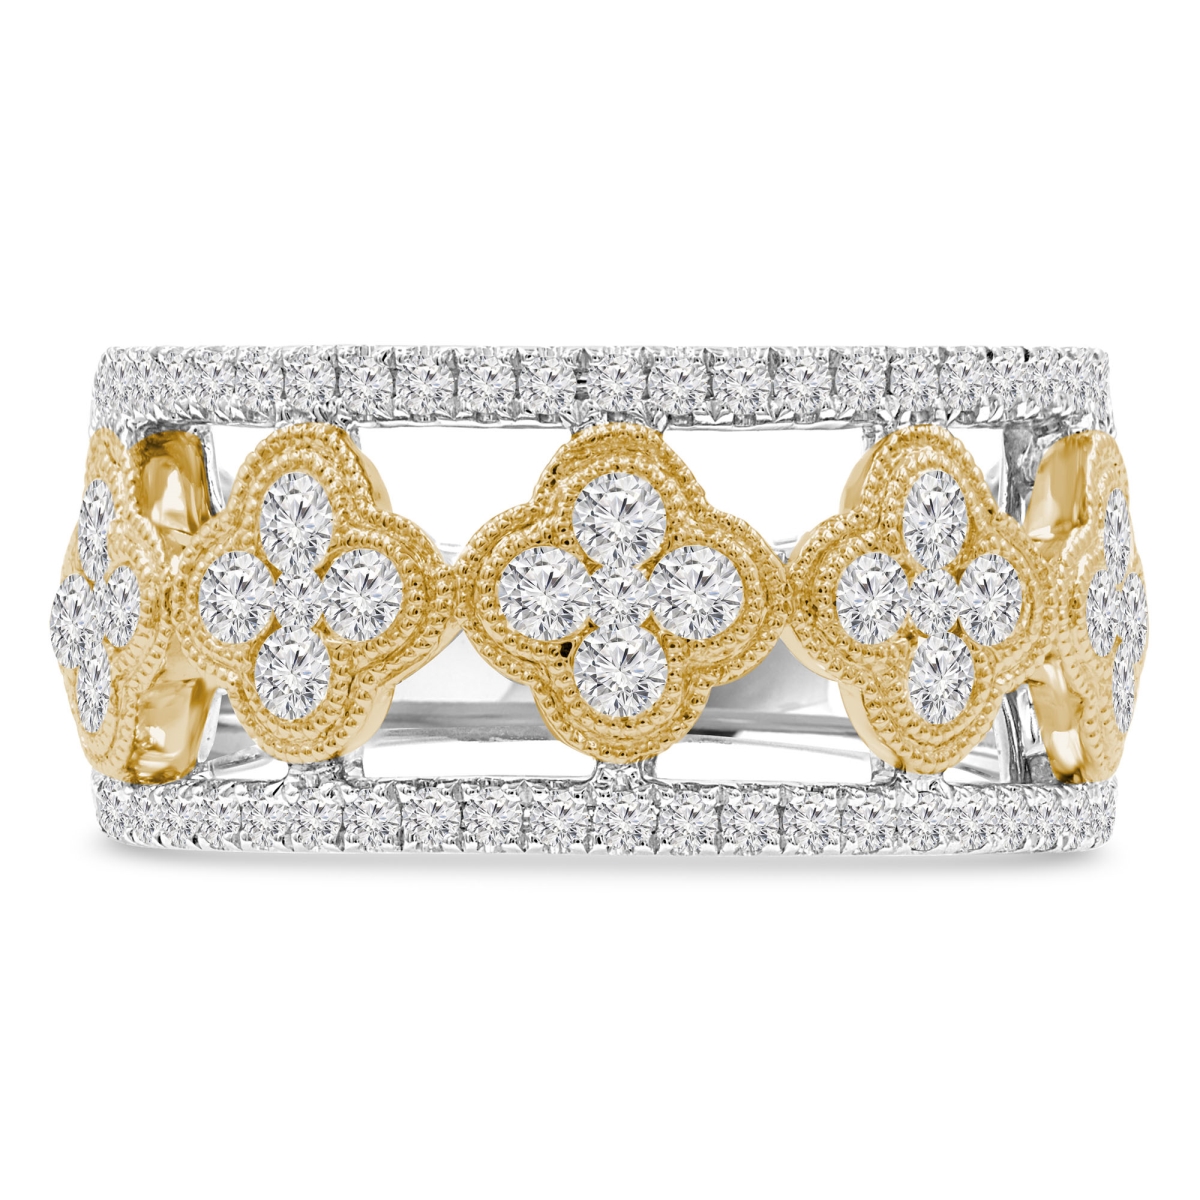 Picture of Majesty Diamonds MDR210140-3.5 1 CTW Round Diamond Cocktail Ring in 14K Two-Tone Gold - Size 3.5